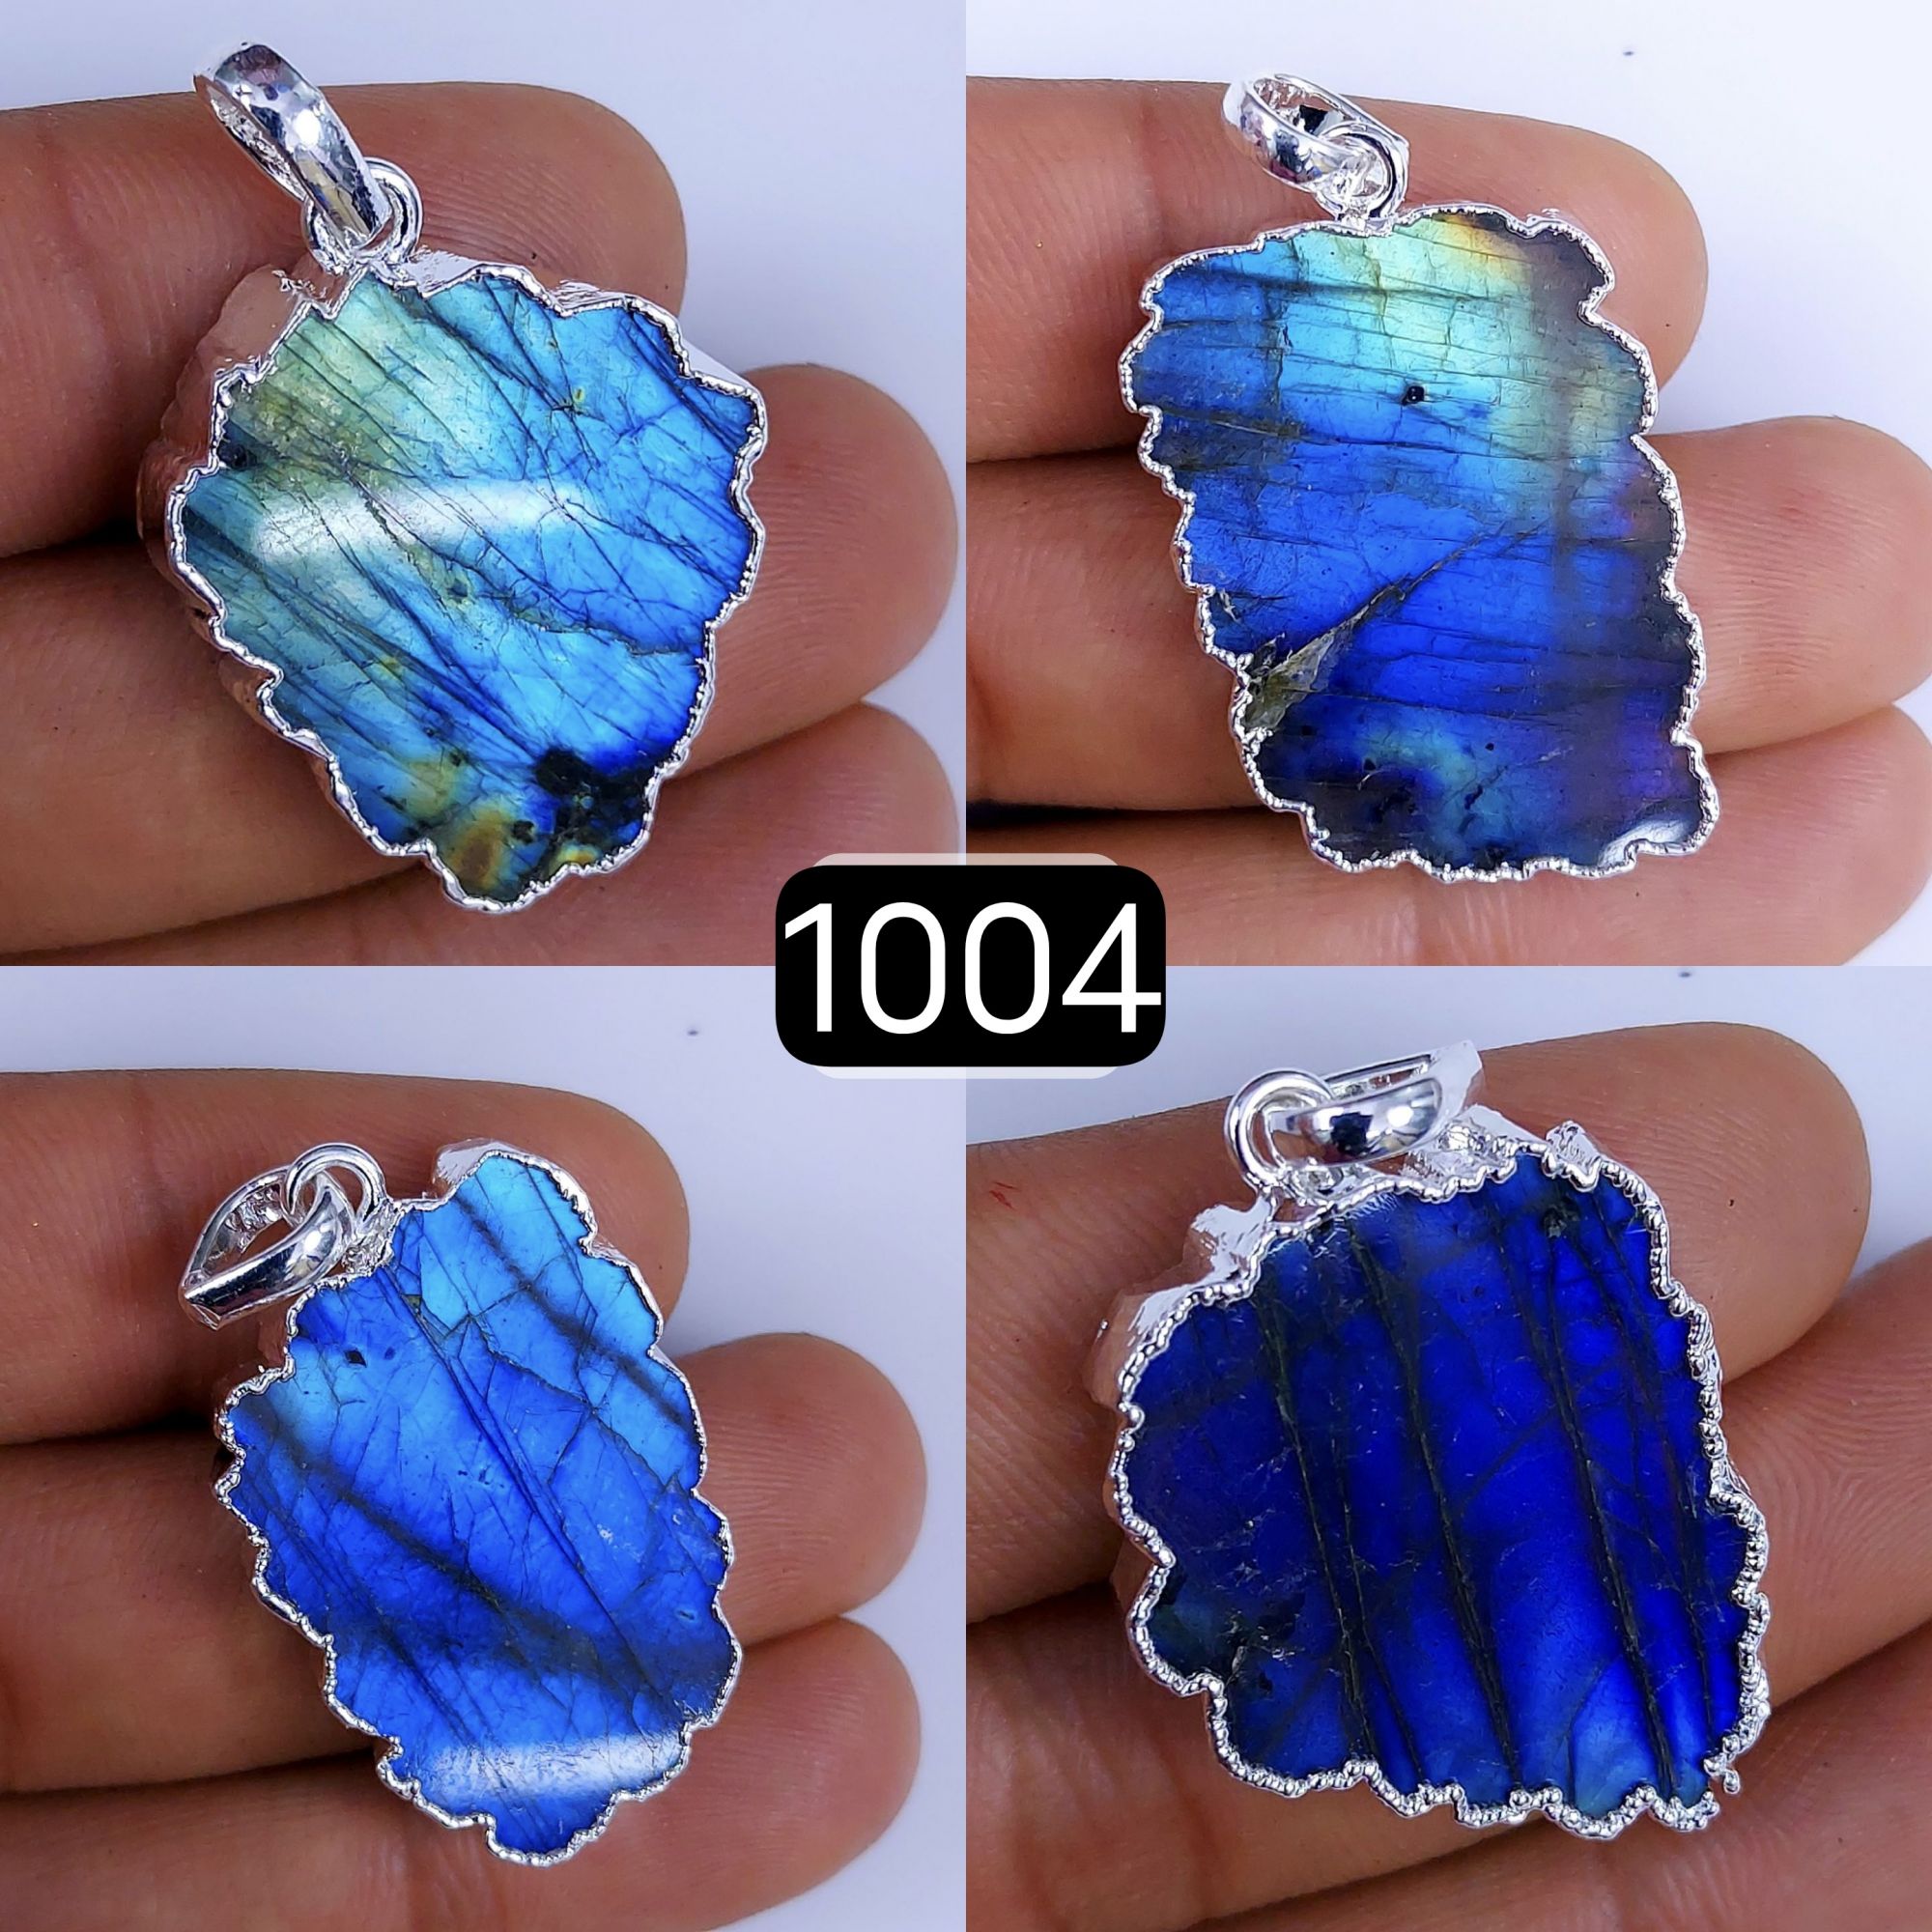 172Cts Natural Blue Labradorite Silver Electroplated Slice Pendant 32x18 22x12mm#1004